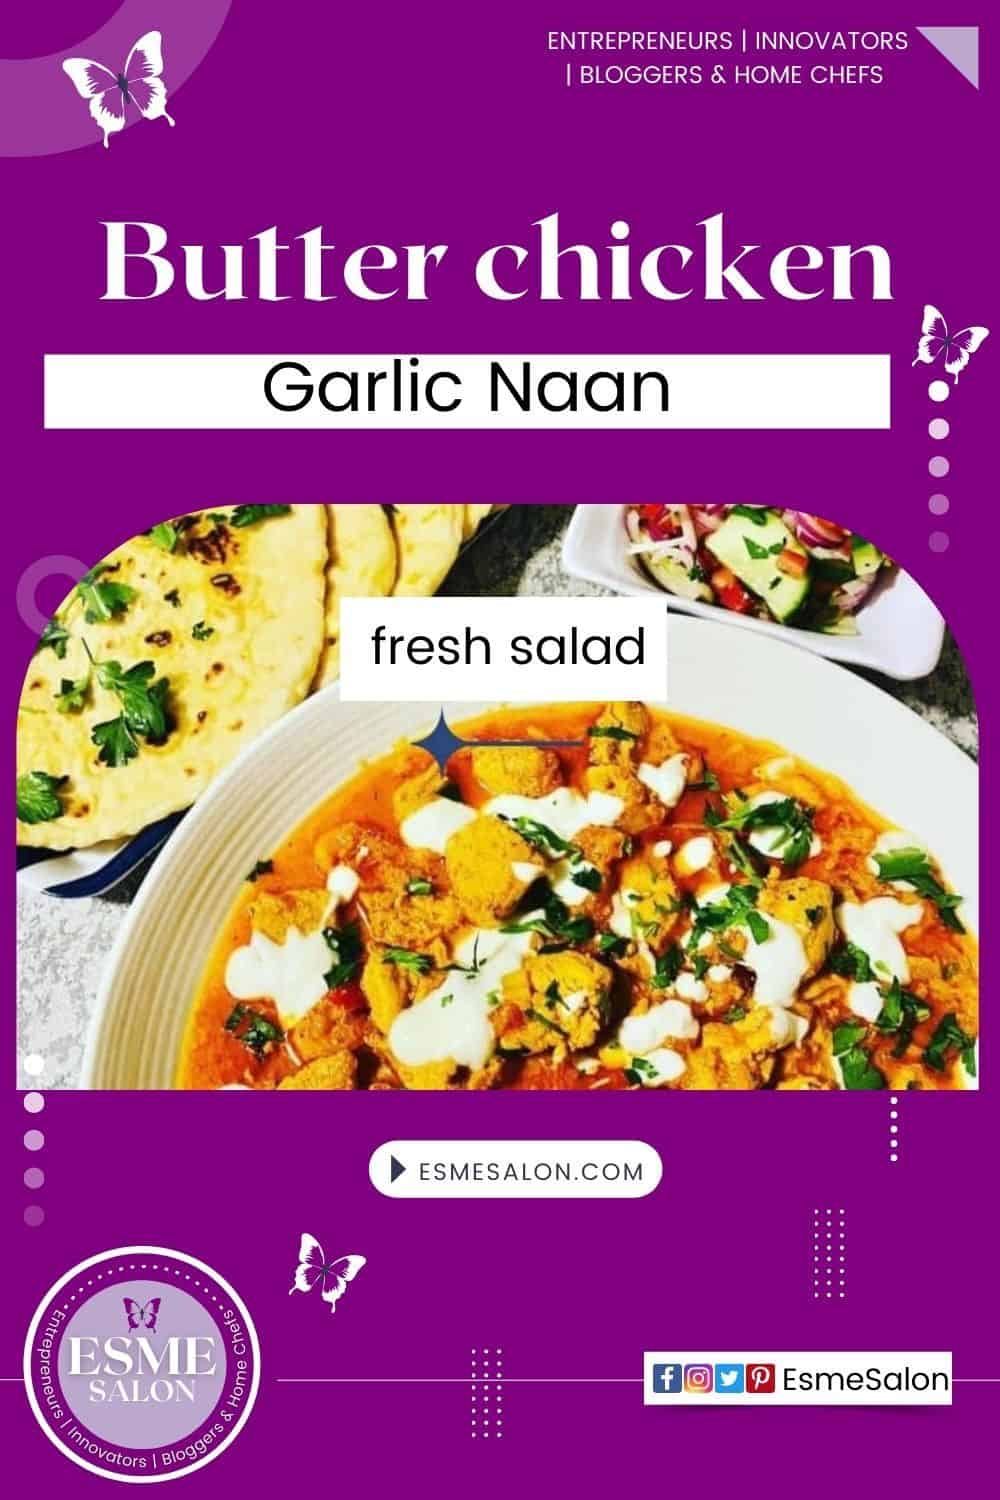 A bowl of butter chicken, a plate of Garlic Naan and a side of fresh salad